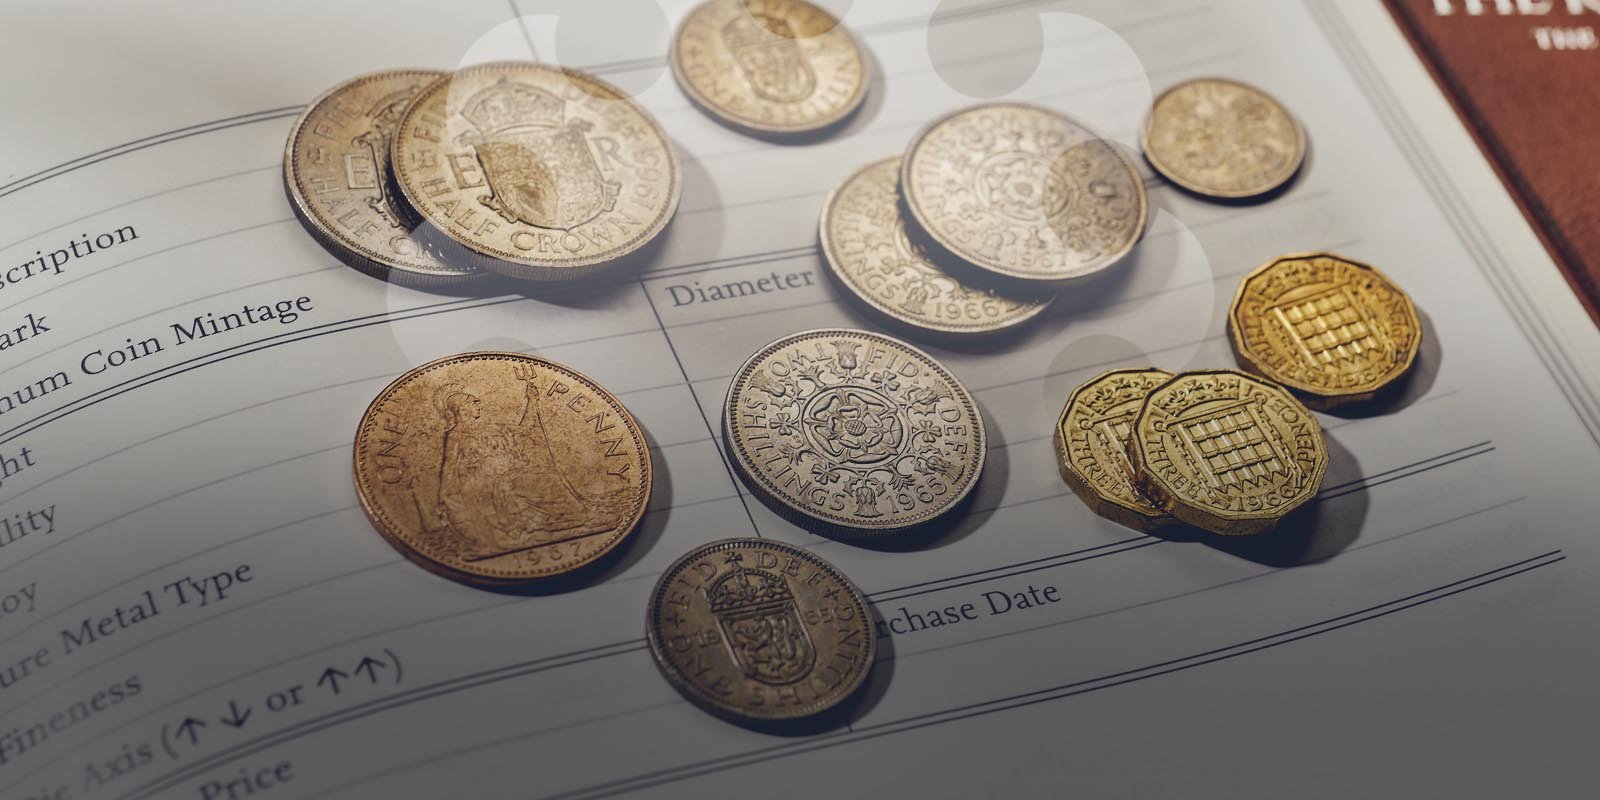 The Royal Mint’s Coin Buying Service